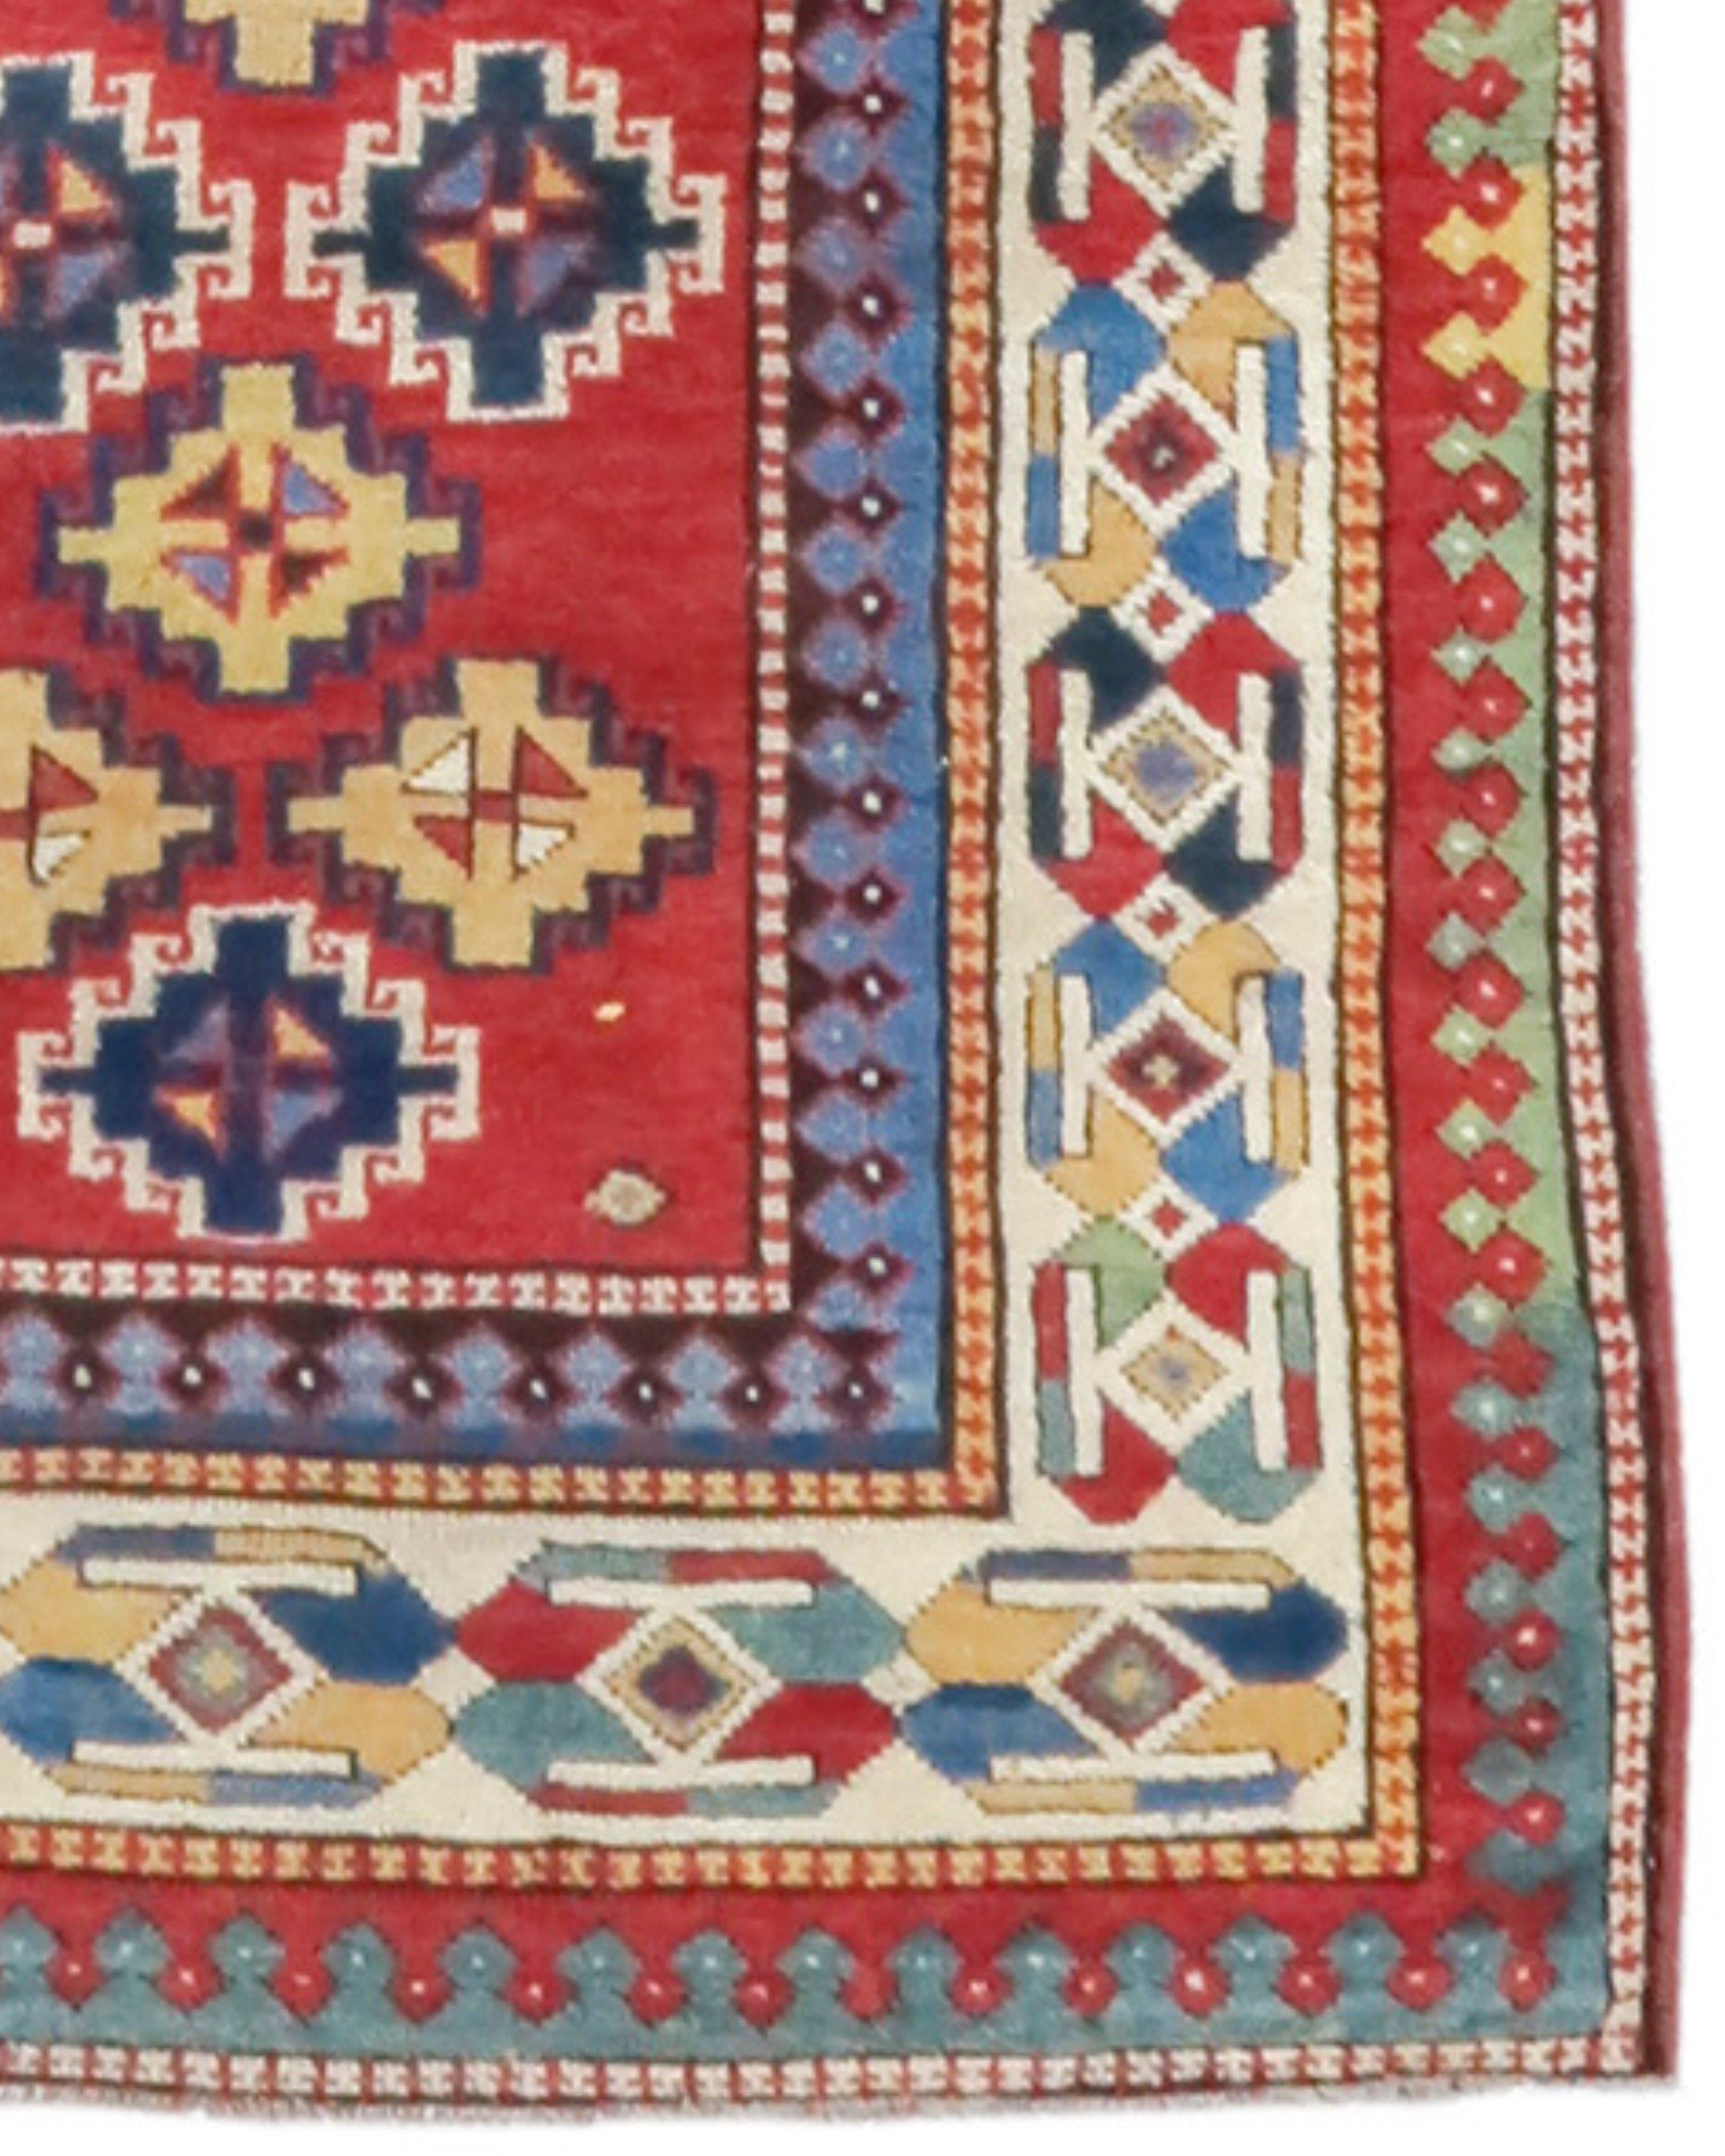 Antique Caucasian Moghan Runner Rug, 19th Century

Additional Information:
Dimensions: 3'3